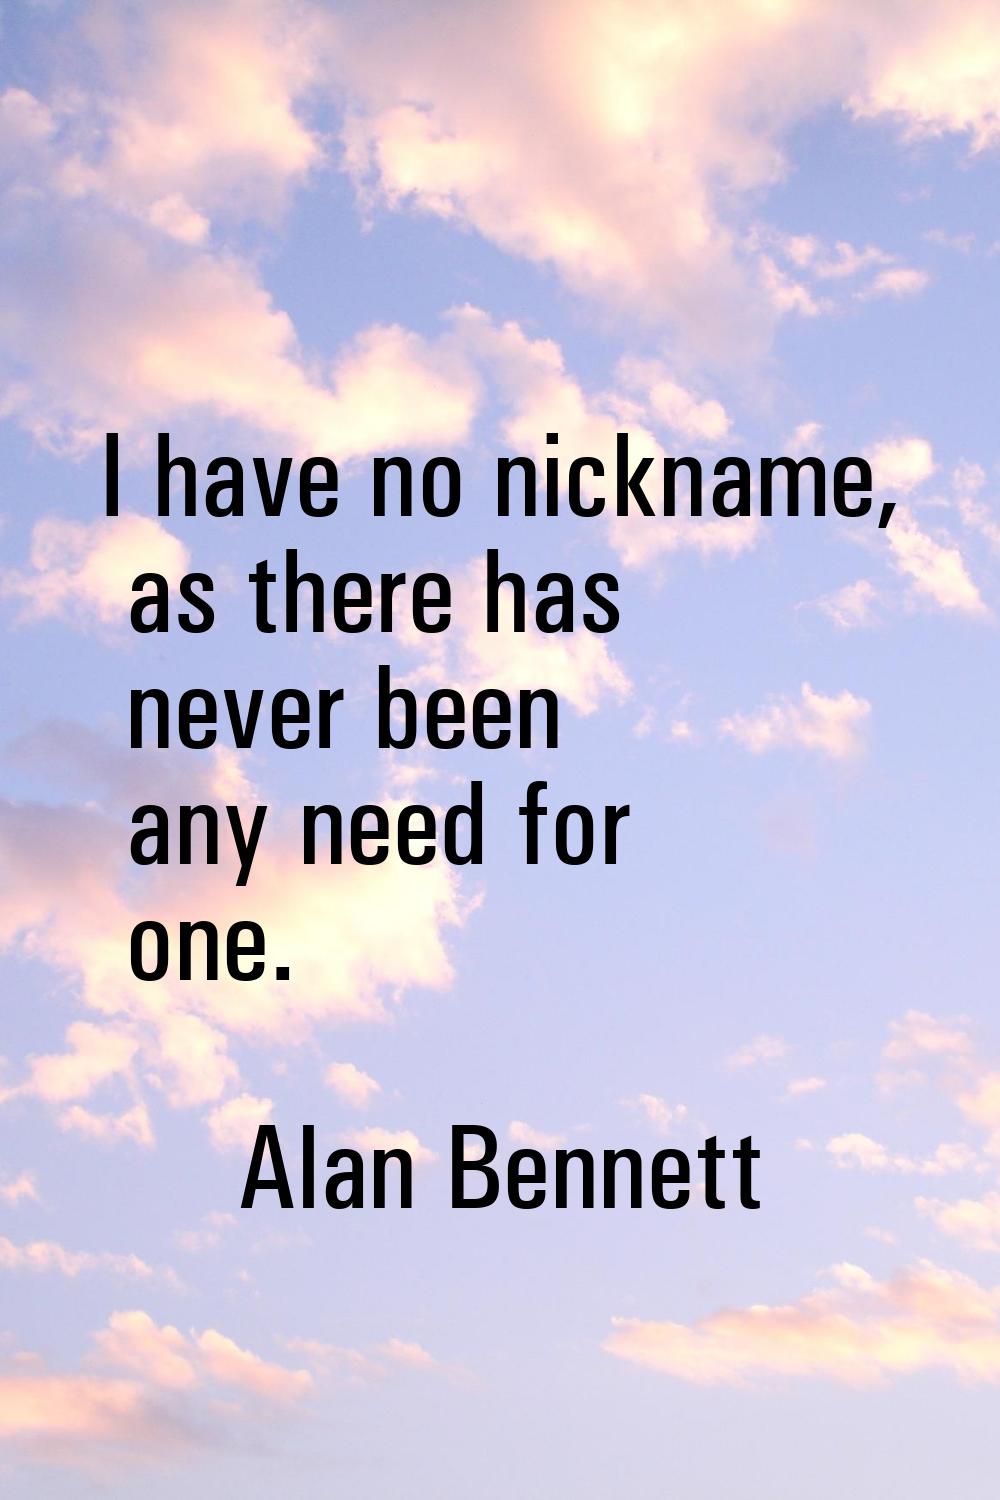 I have no nickname, as there has never been any need for one.